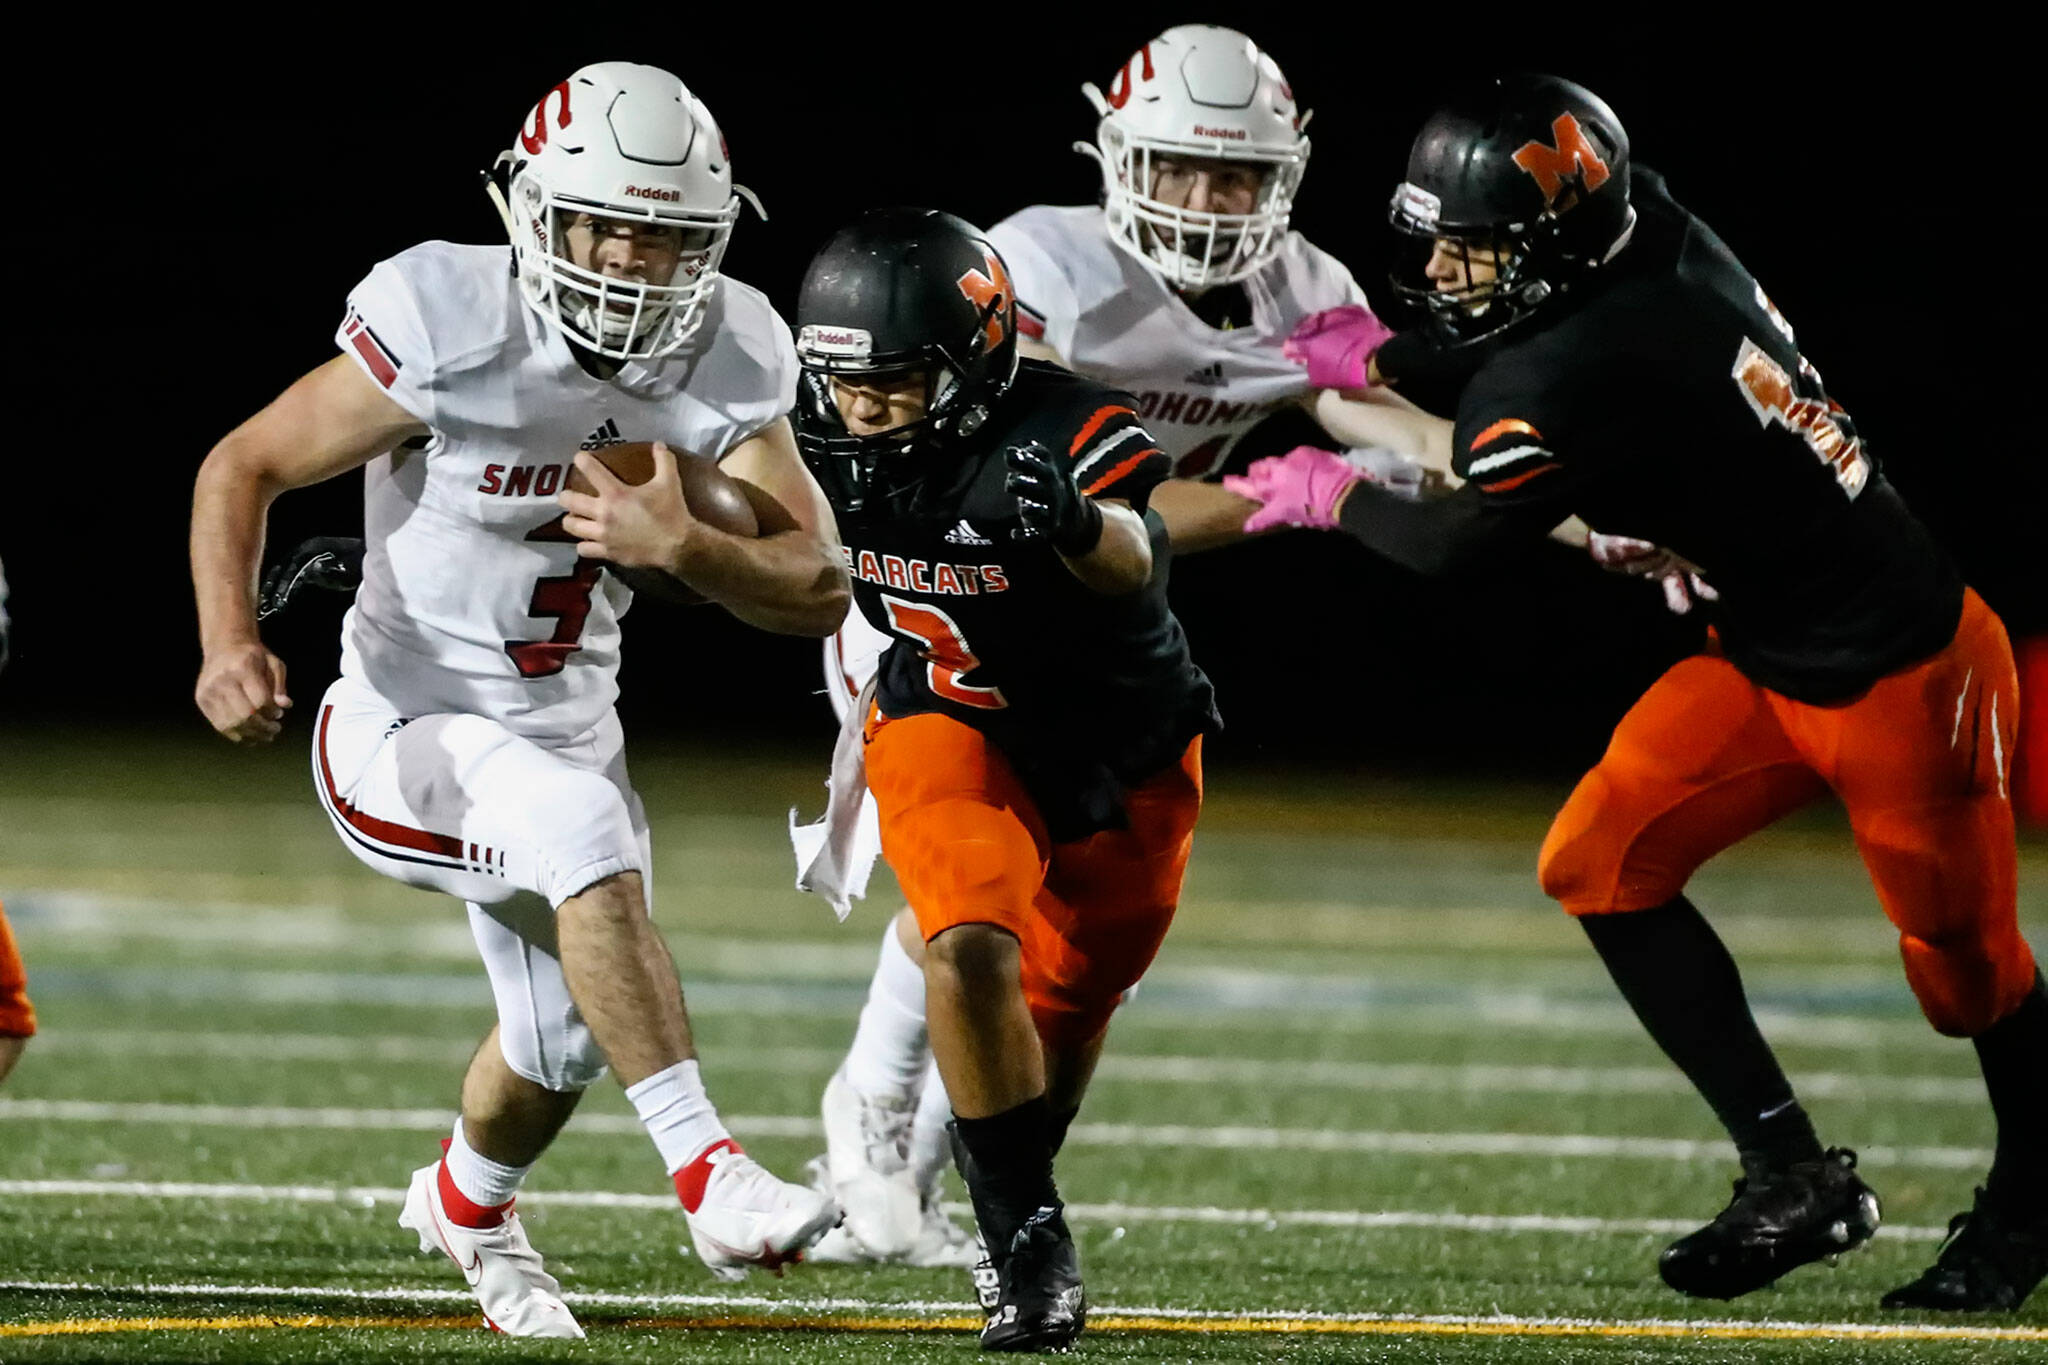 Snohomish’s Joshua Vandergriend (3) has totaled 1,528 yards from scrimmage this season and ranks fourth locally in rushing yards and 10th in receiving yards. (Kevin Clark / The Herald)